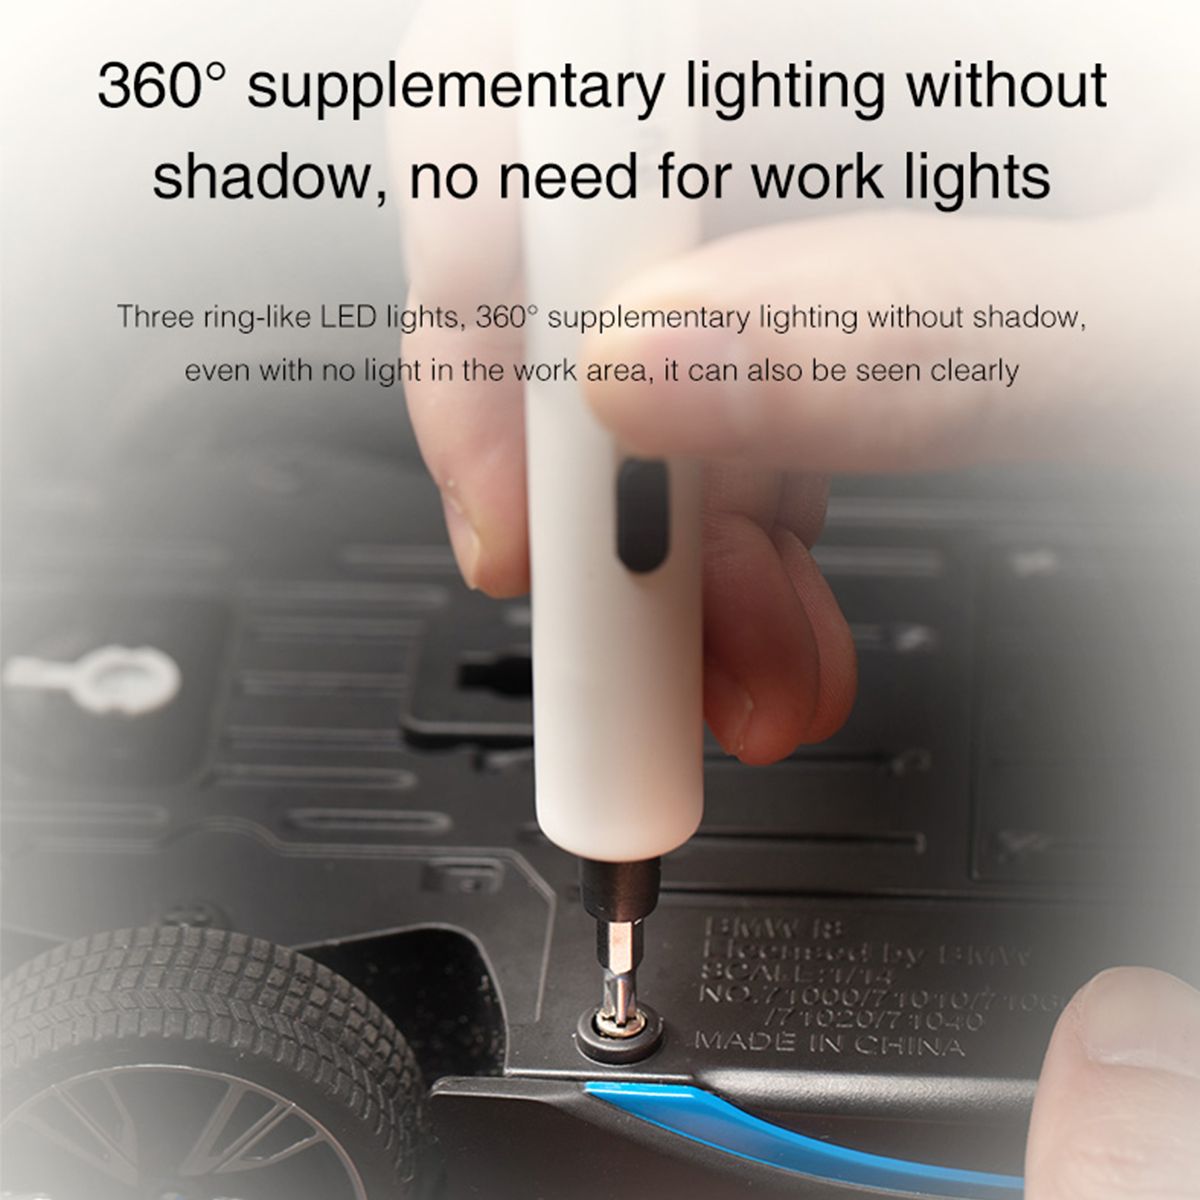 37V-Electric-Screwdriver-Portable-Rechargeable-Lithium-Precision-Screwdriver-Repair-Tools-Kit-1719759